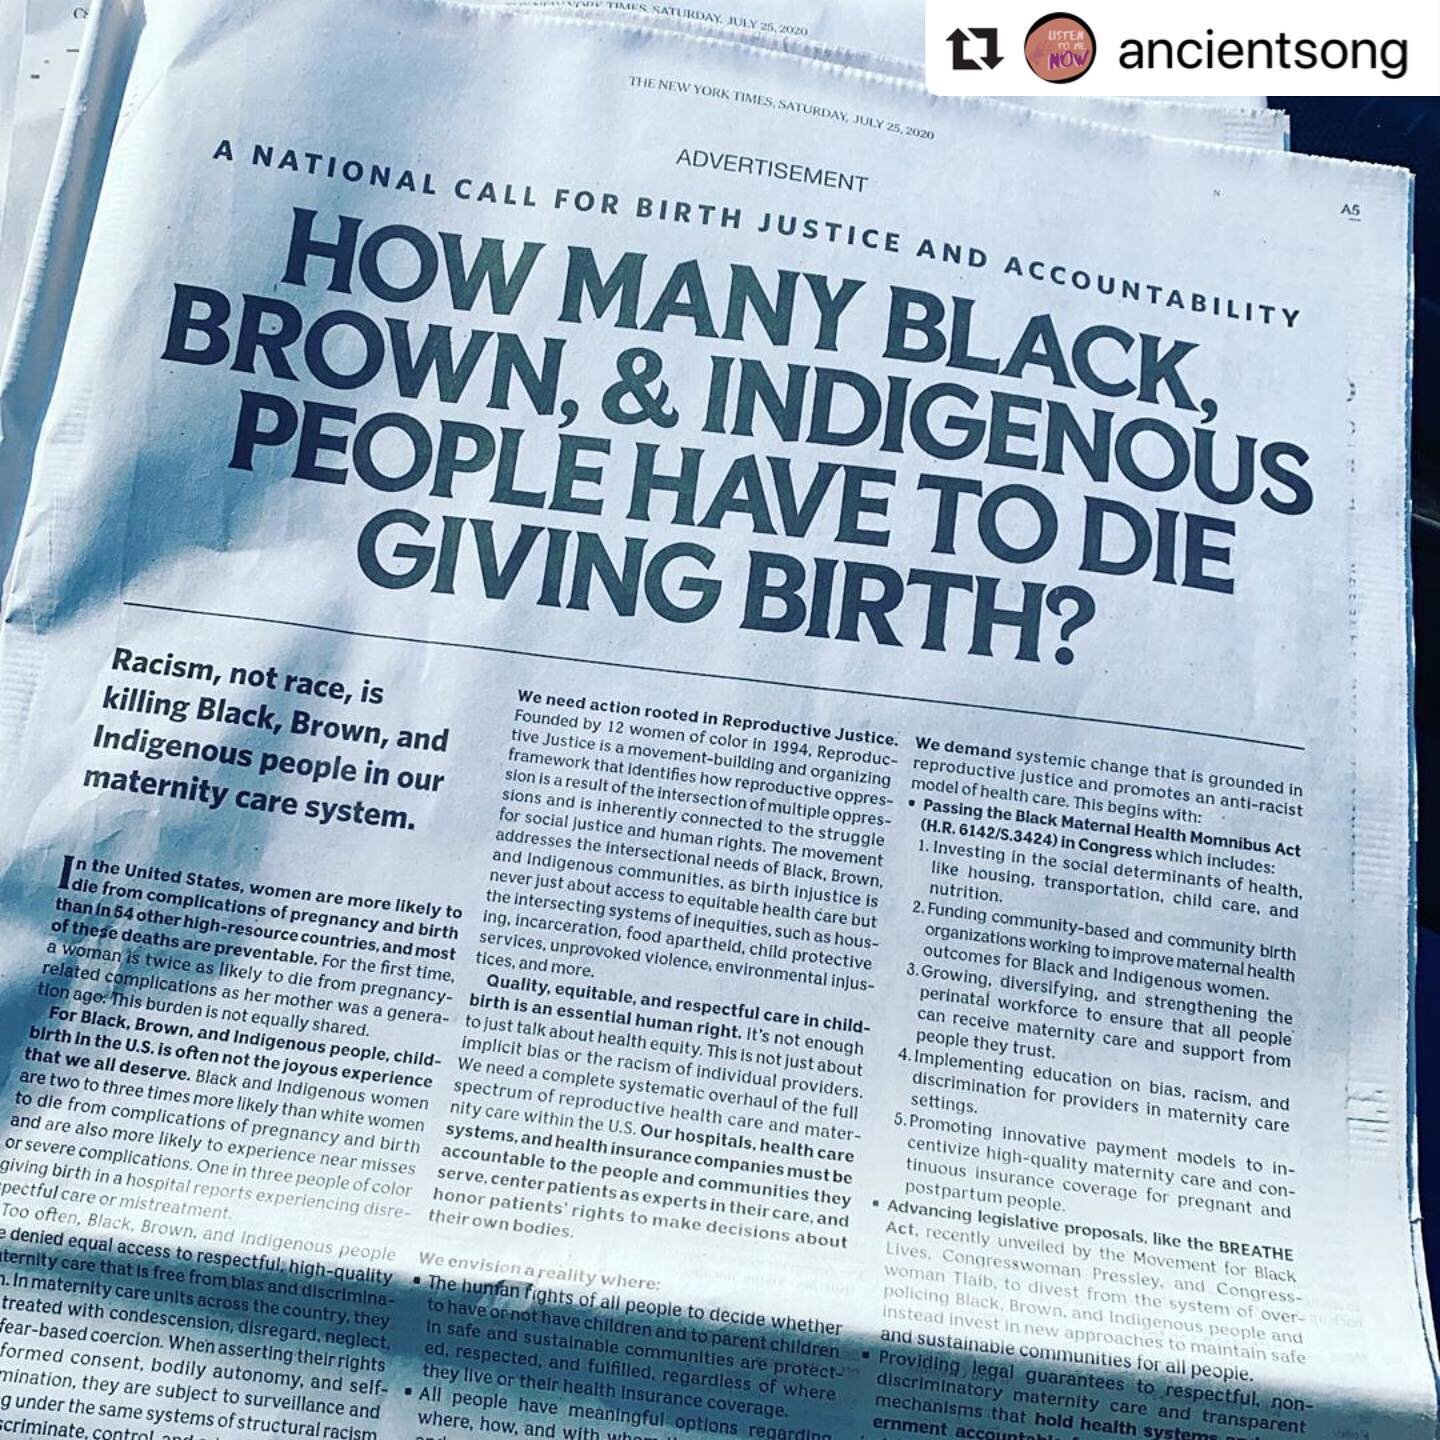 #Repost @ancientsong with @make_repost
・・・
In this nation Black, Brown , and Indigenous birthing people have endured the pain of racism and oppression that seeks to destroy our spirit. No more!  Go get today&rsquo;s NY Times! This is a national call 